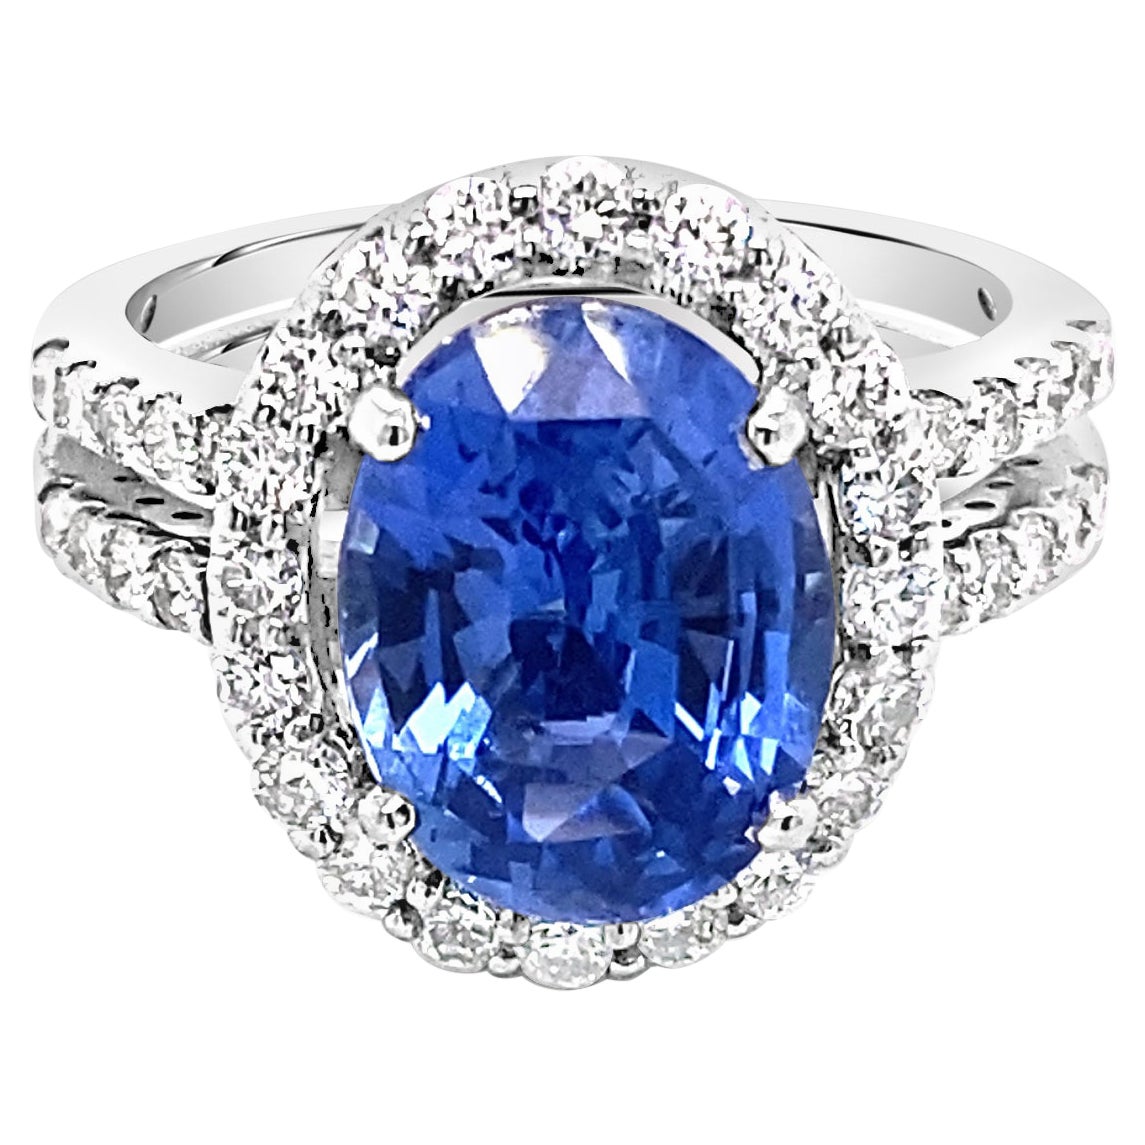 GIA 4.61 Carat Oval Burma Sapphire Ring with 0.73ctw Diamond Halo Cocktail Ring